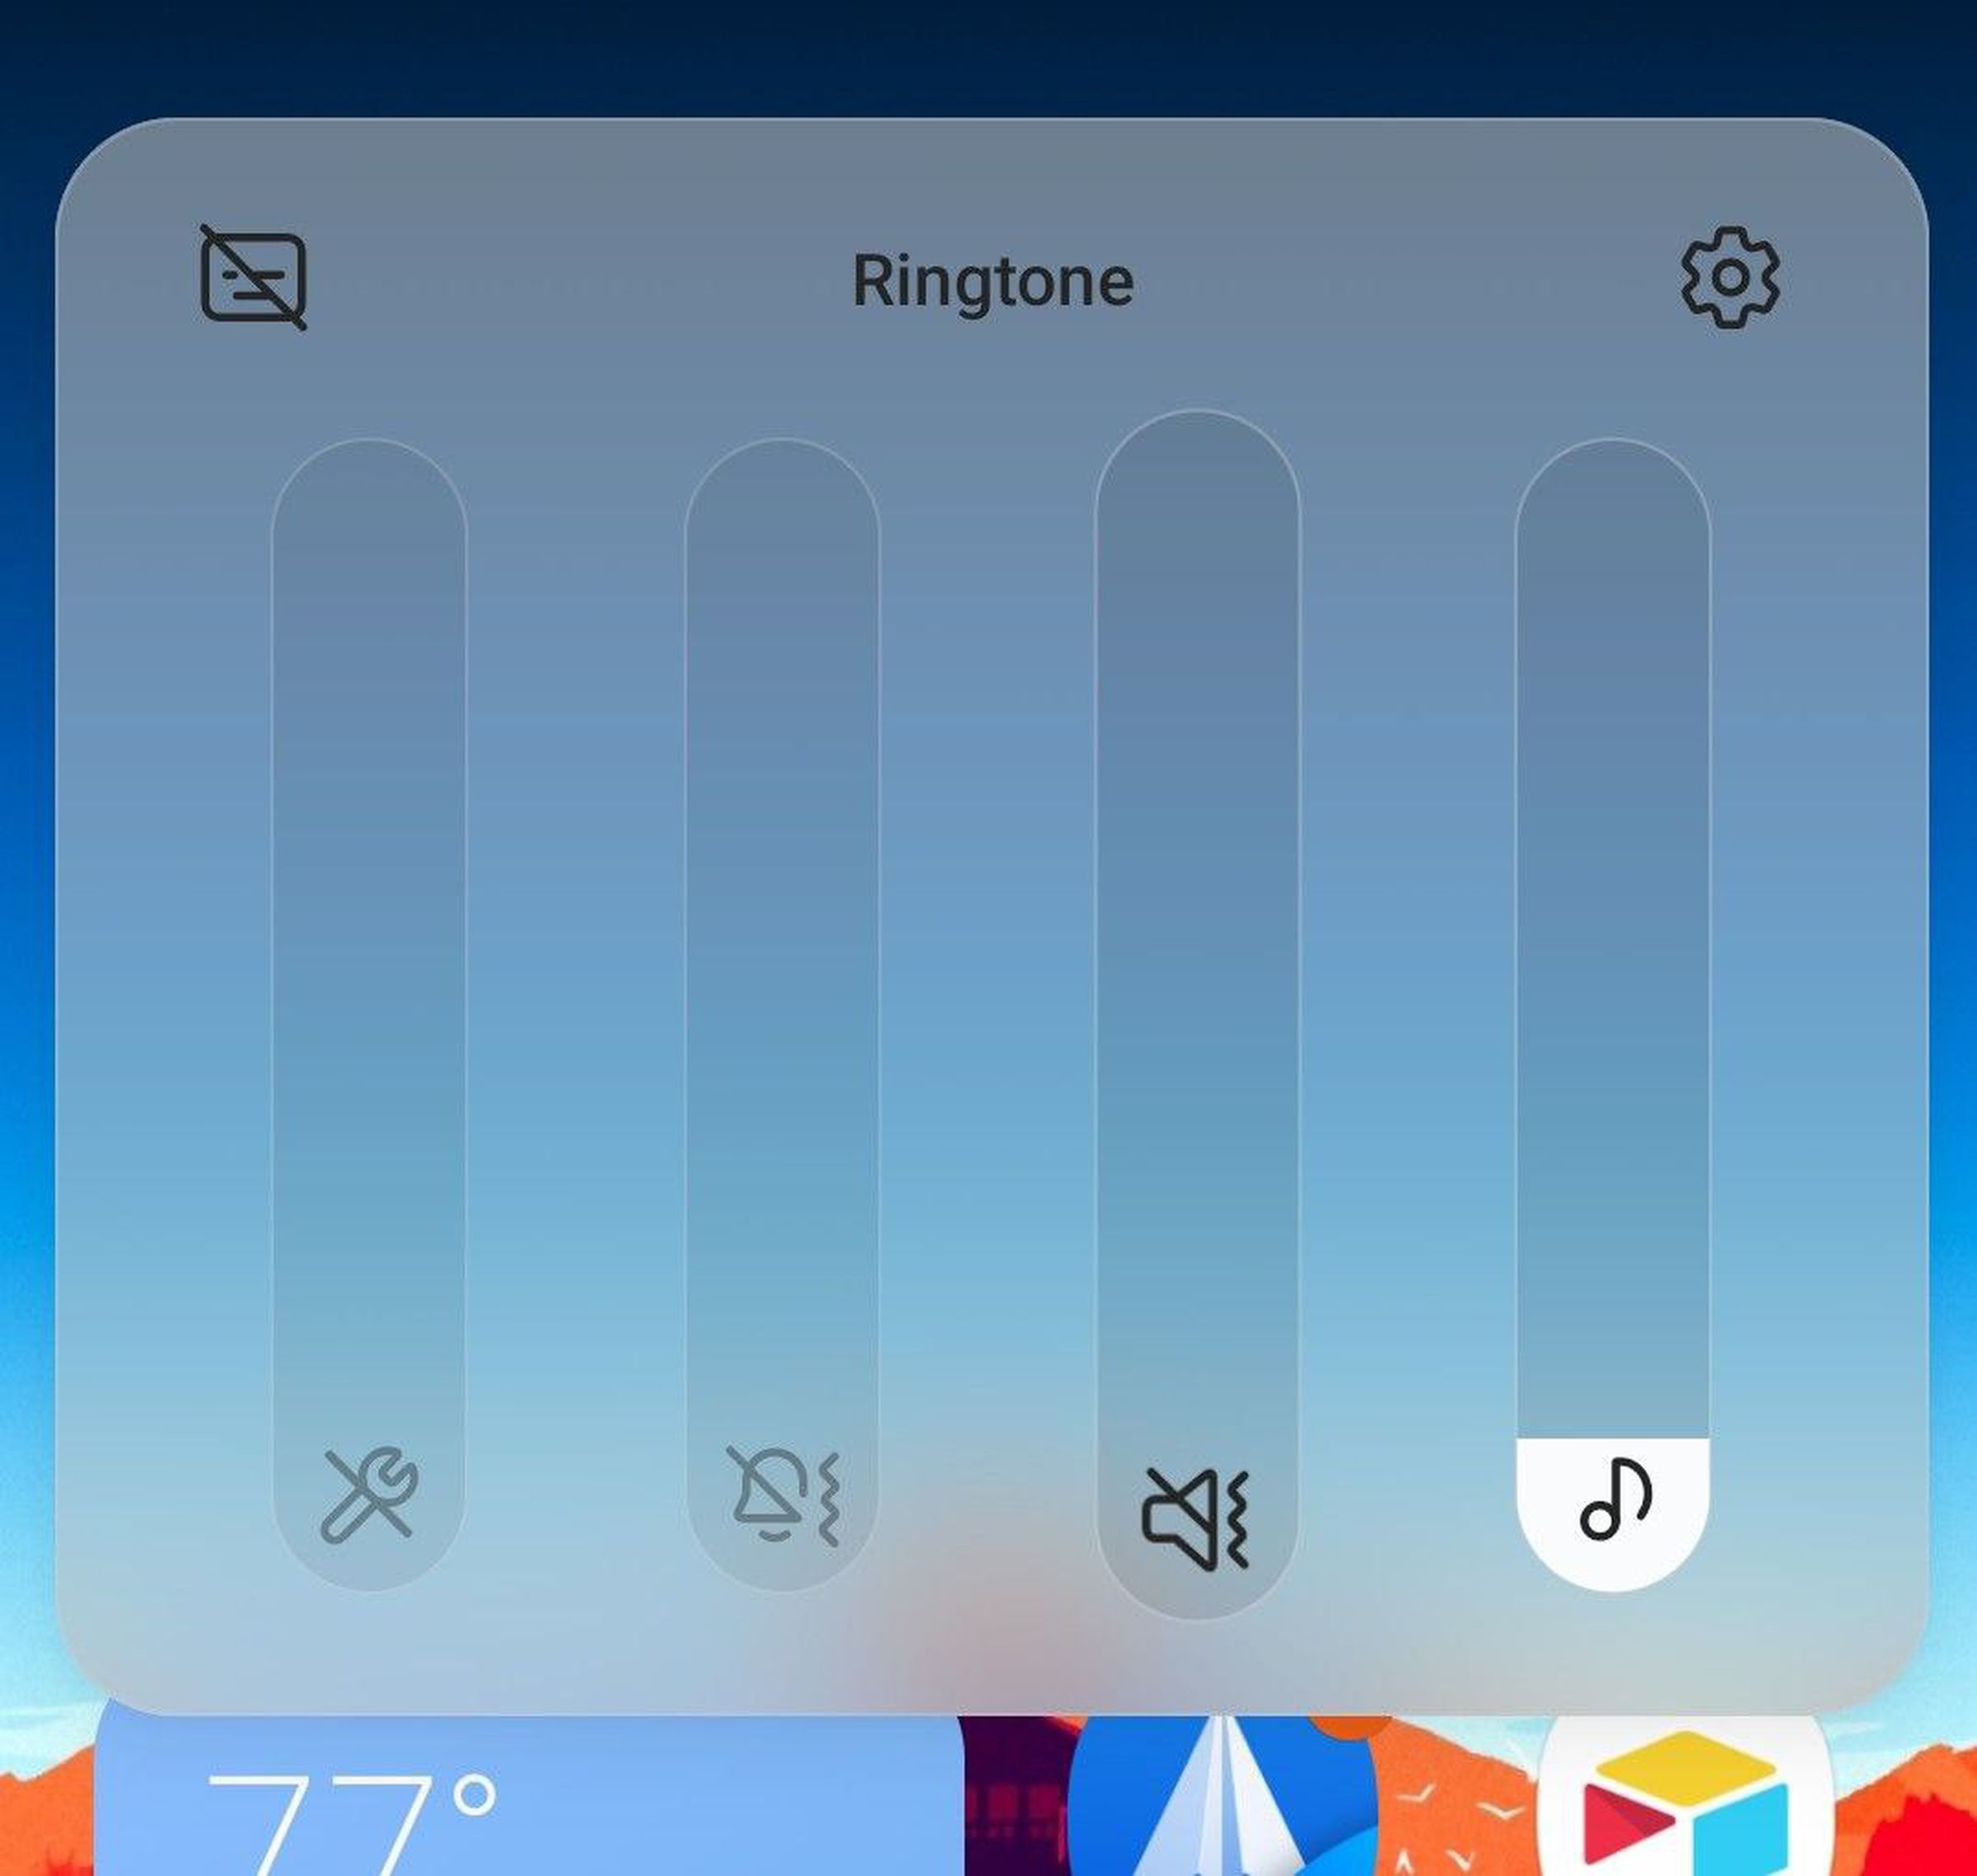 Samsung’s current interface for managing volume — turning the third slider down all the way puts your phone on vibrate, silencing Twitter’s refresh noise.